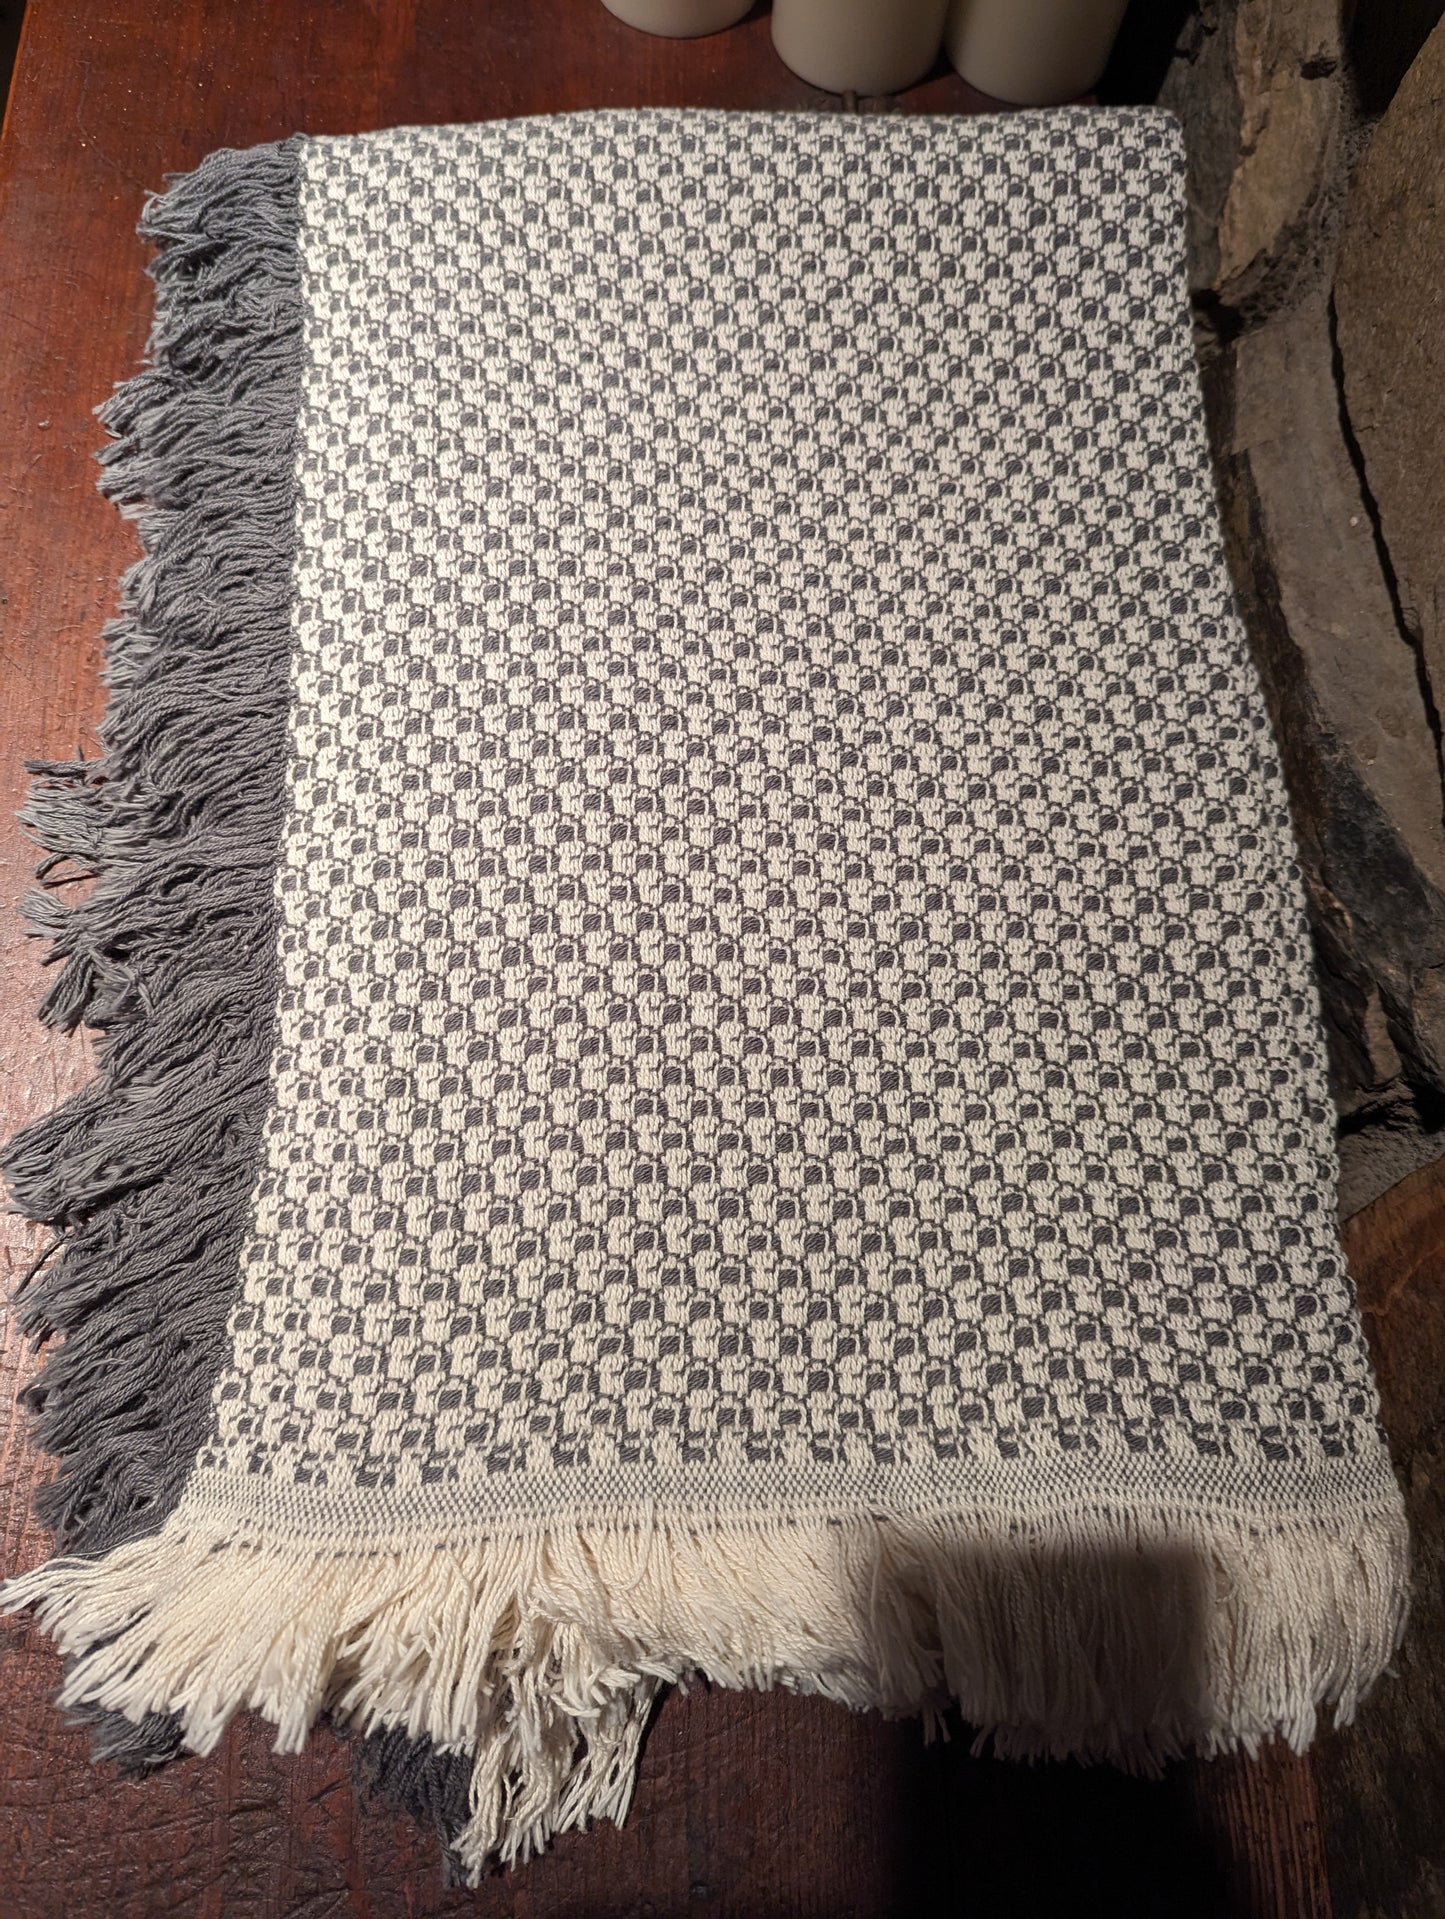 Premium Gray & White Woven Throw Blanket - Made in the USA